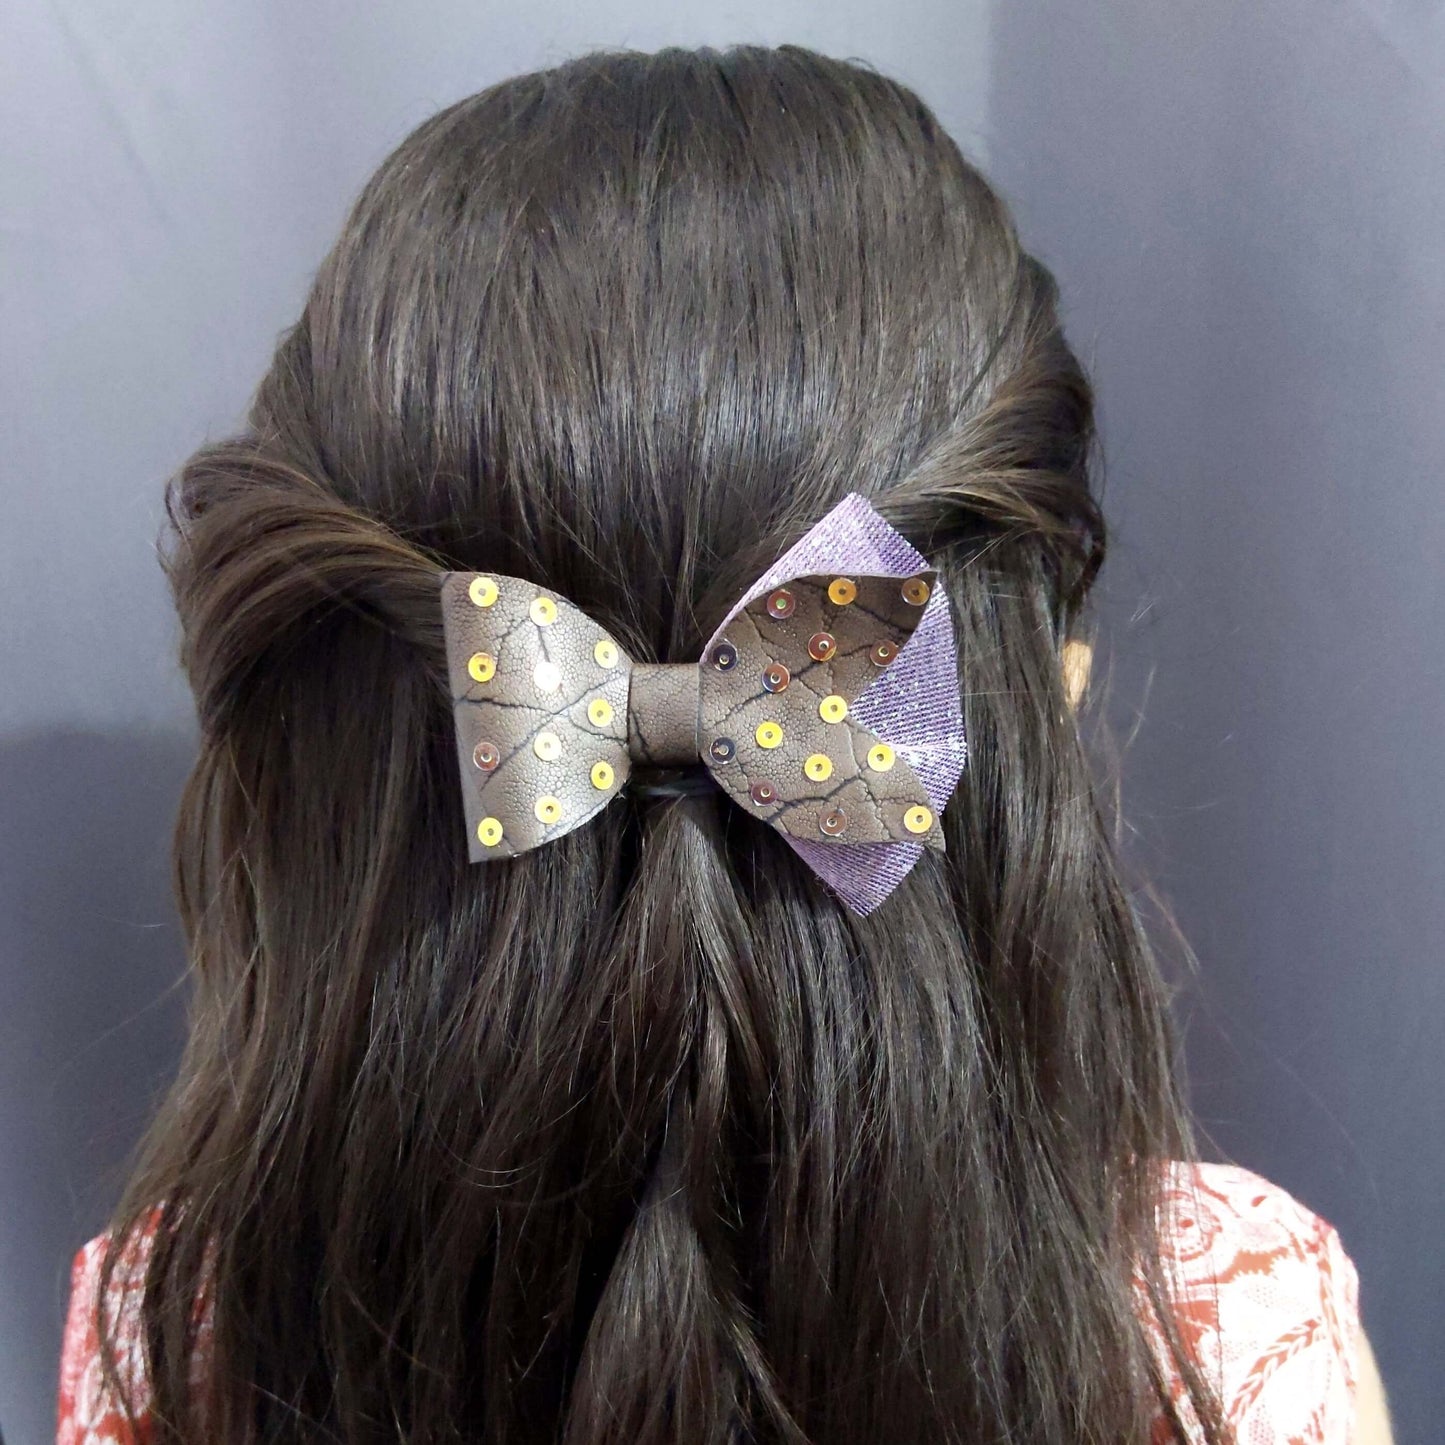 Mermaid embellished with sequins Bow Hair Clip | Designer Hair Accessories for Kids & Girls